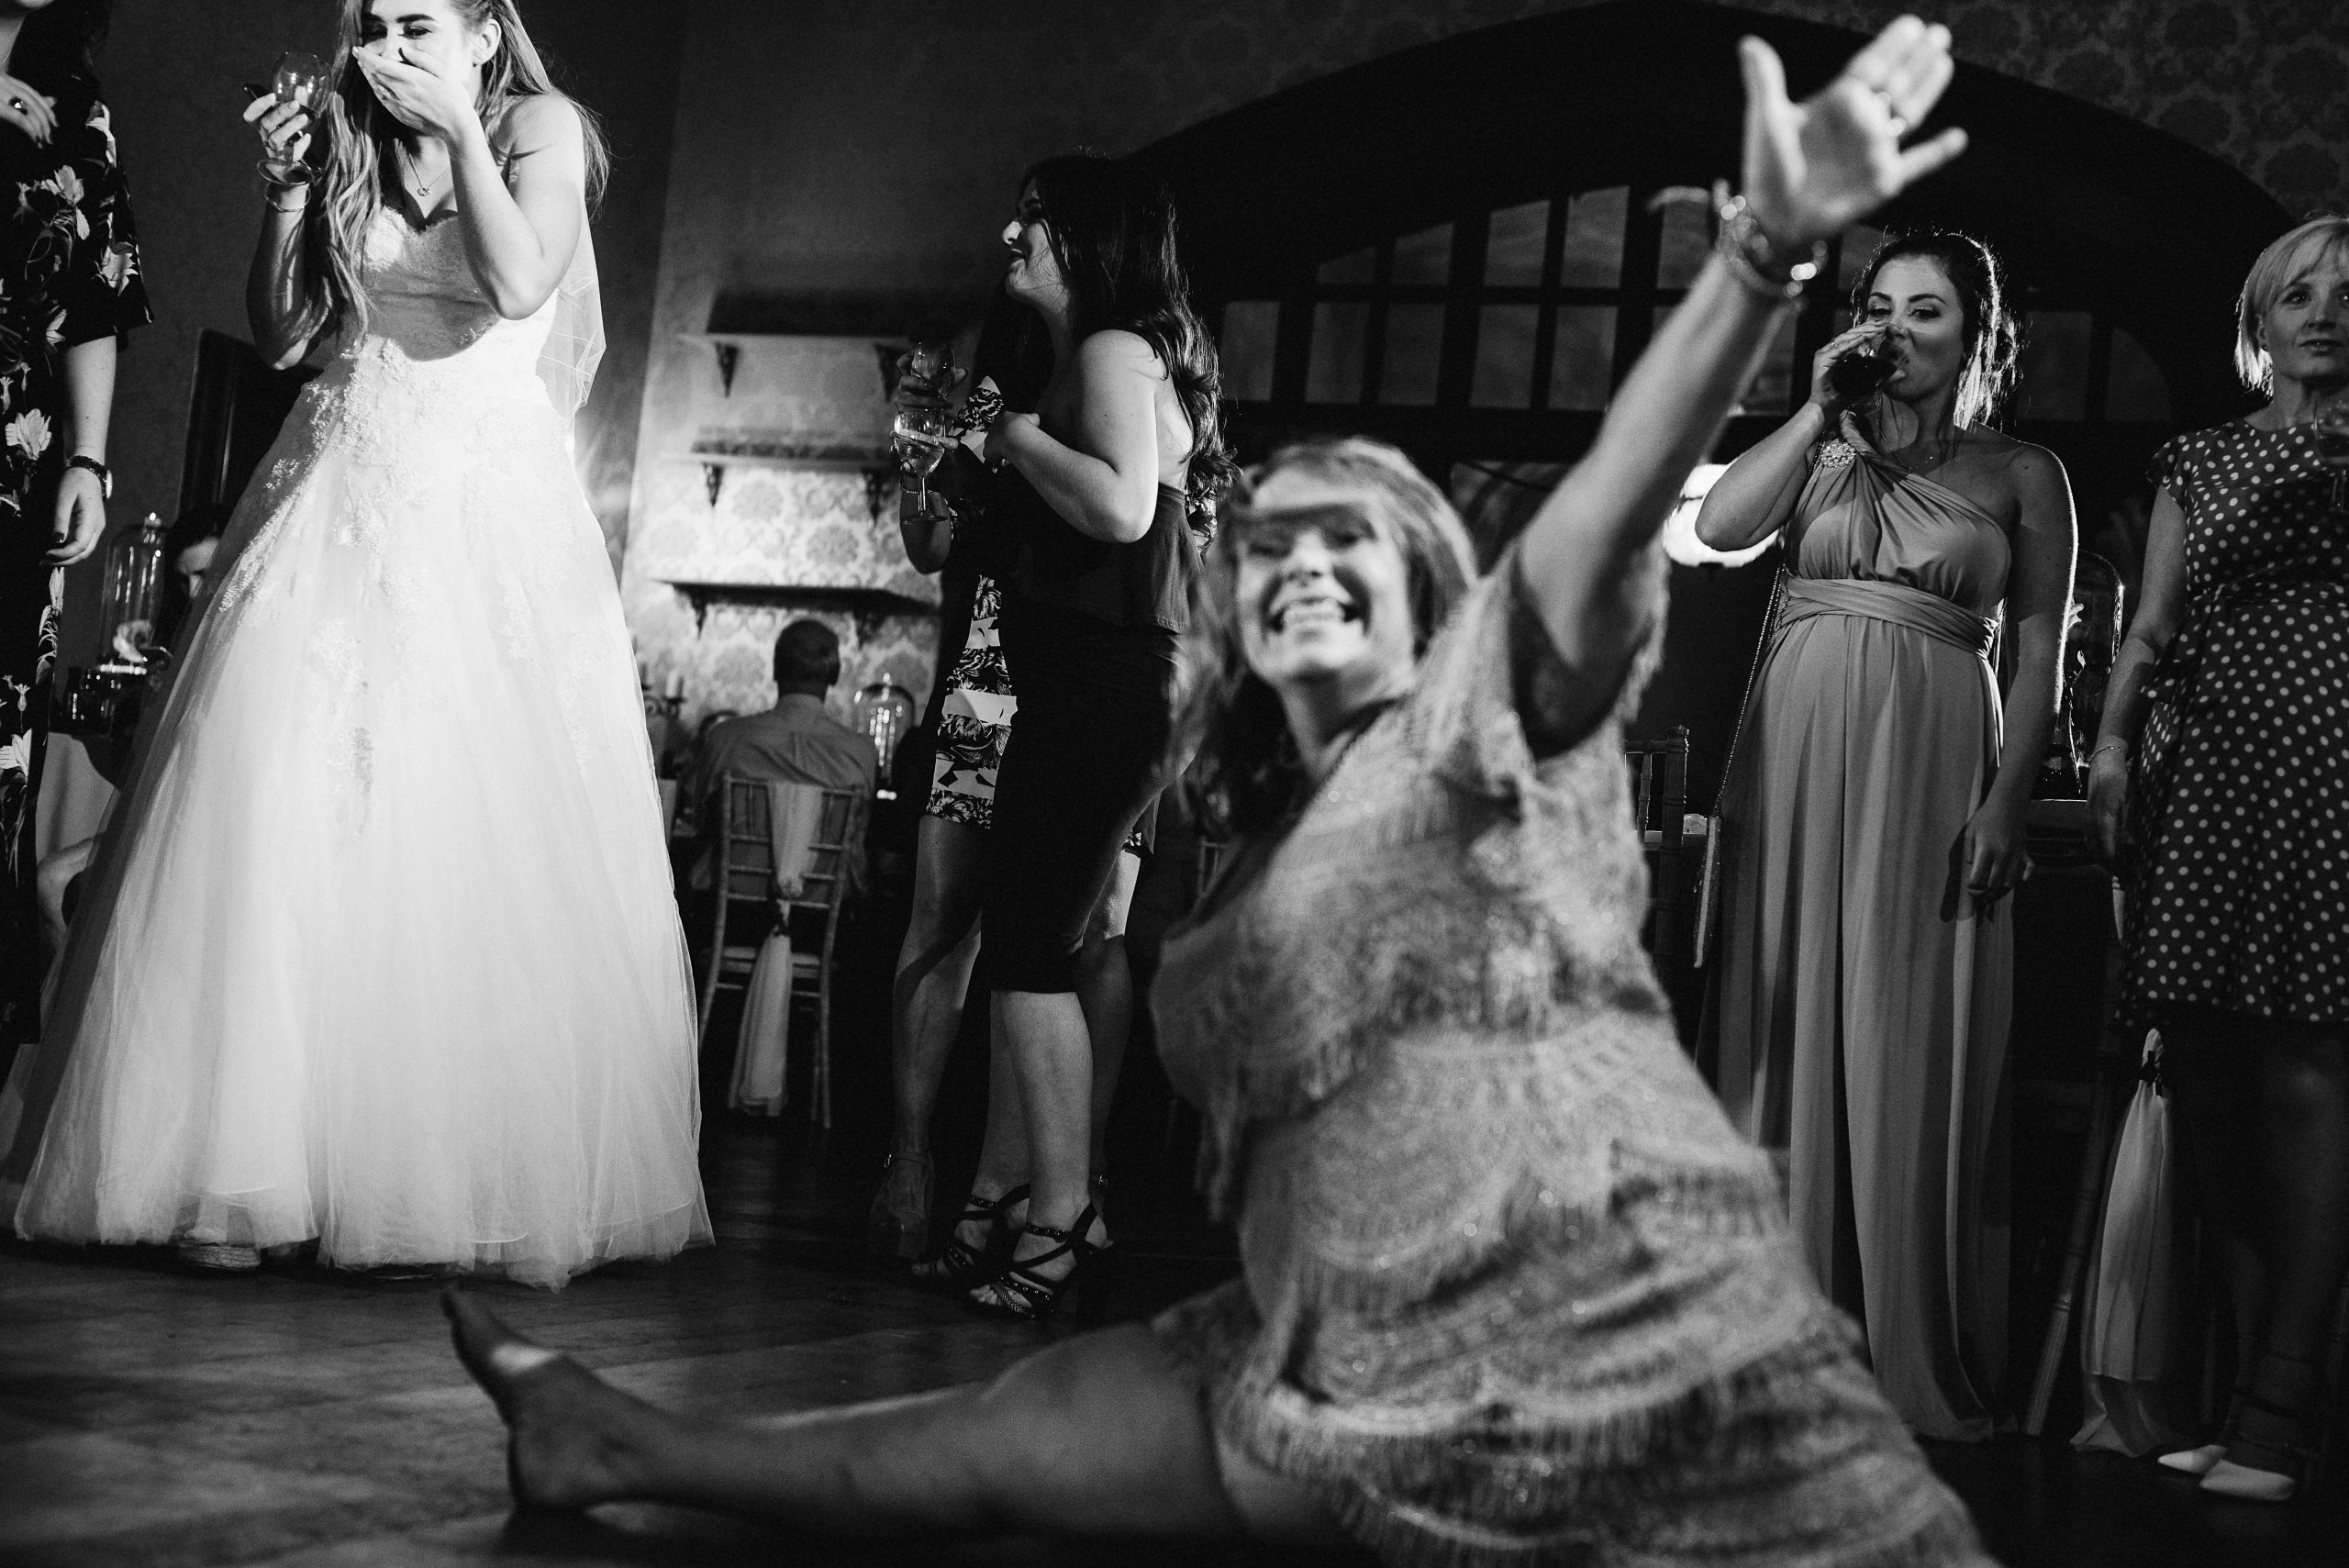 Mother of the bride doing the splits at the wedding party